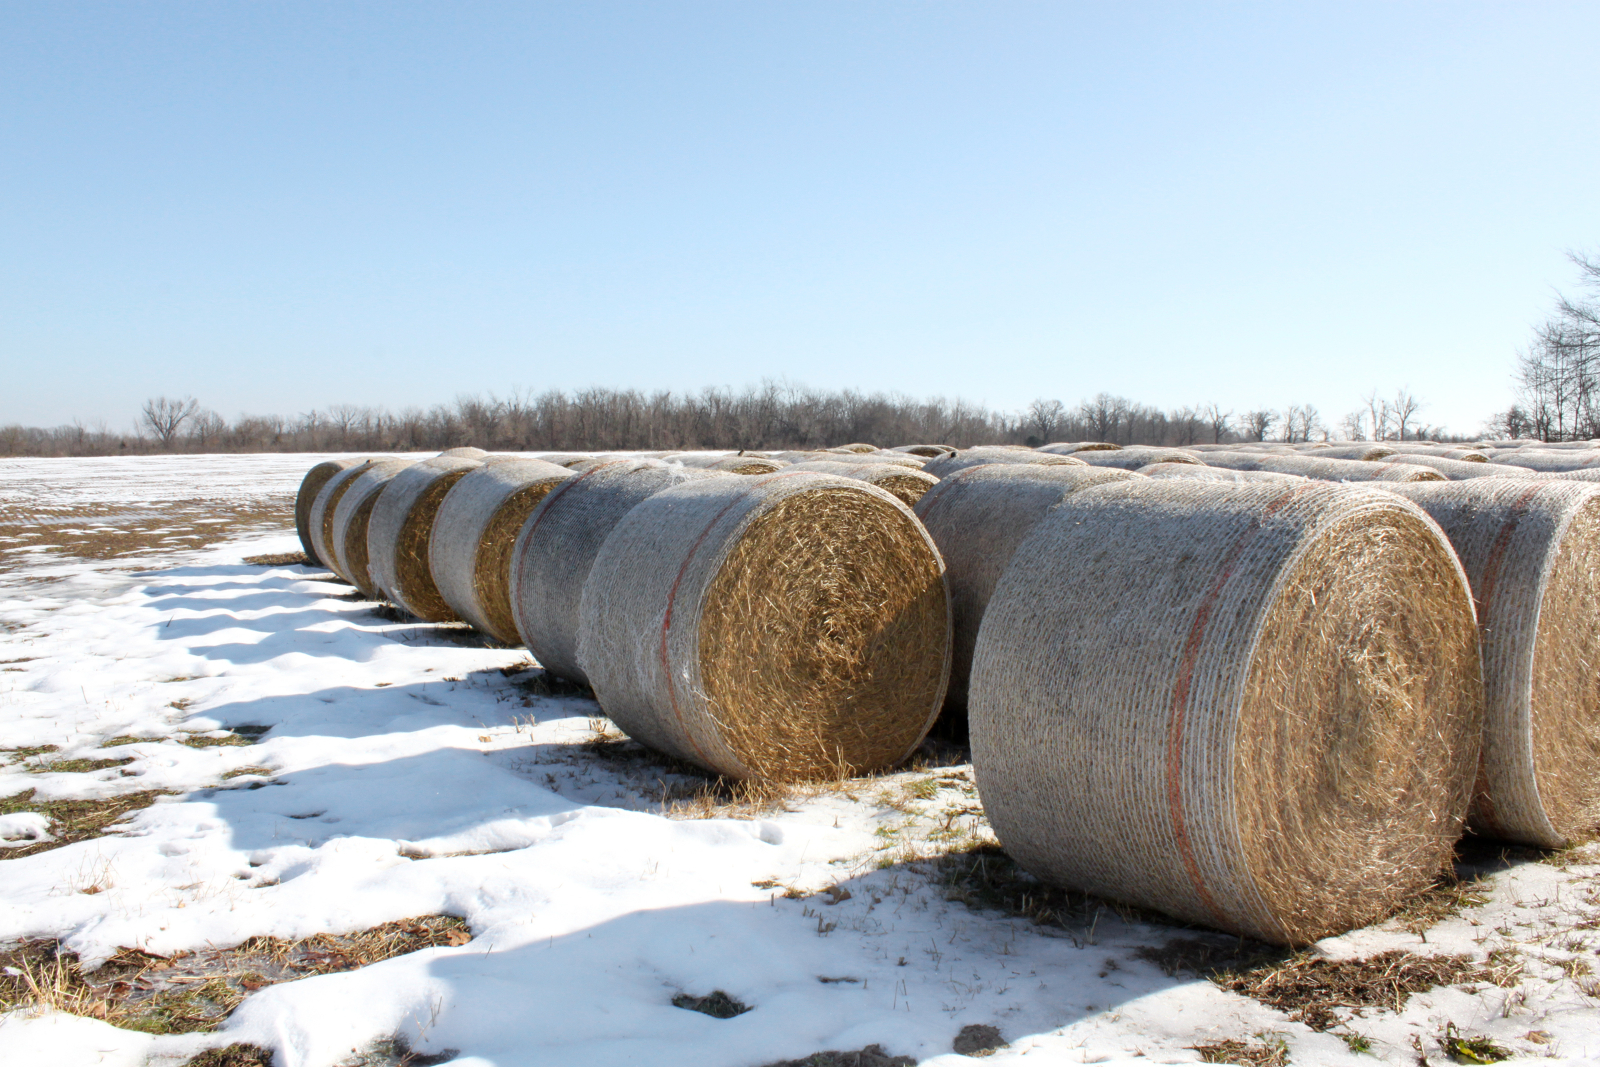 A row of yellow, brown hay bails sits on a snowy felt. The sun is shining and the snow is melting.